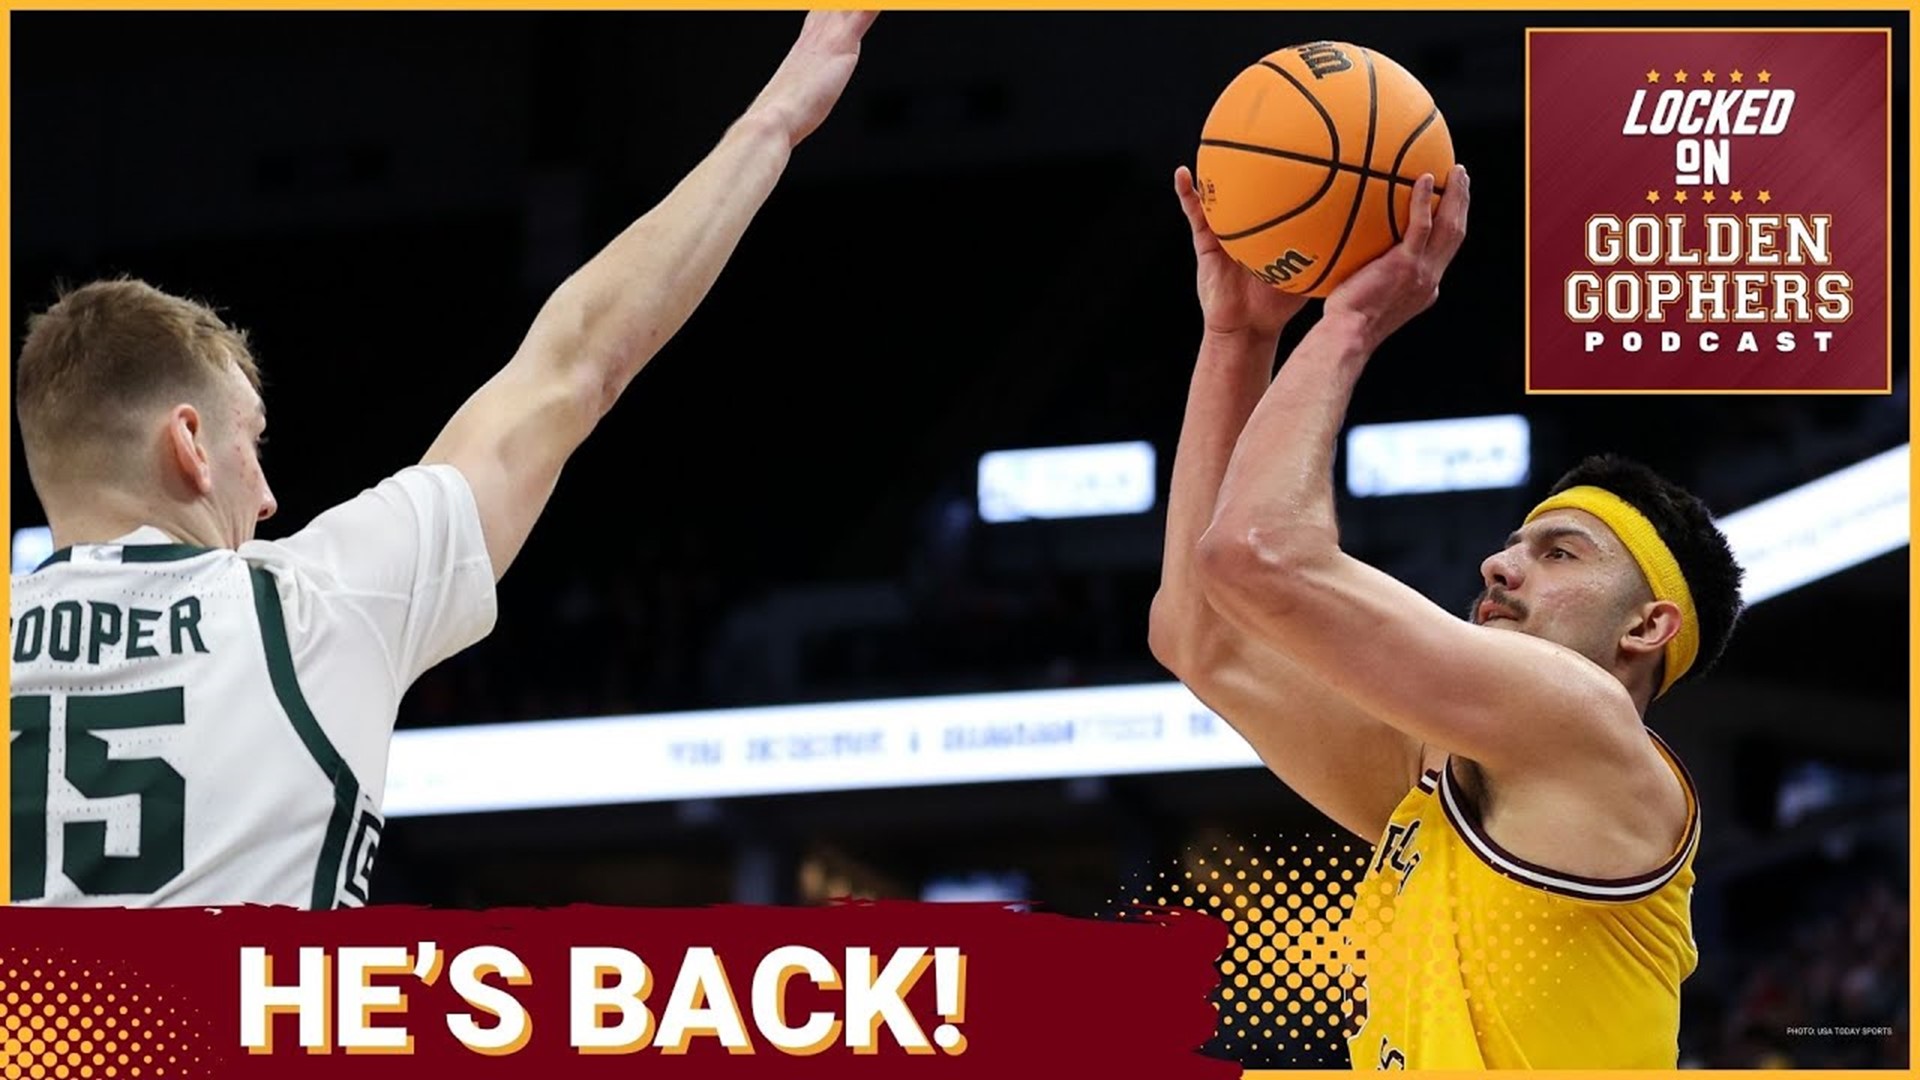 On today's Locked On Golden Gophers, host Kane Rob, iscusses how the Minnesota Gophers MBB team could be sitting with a better outlook now with Dawson Garcia